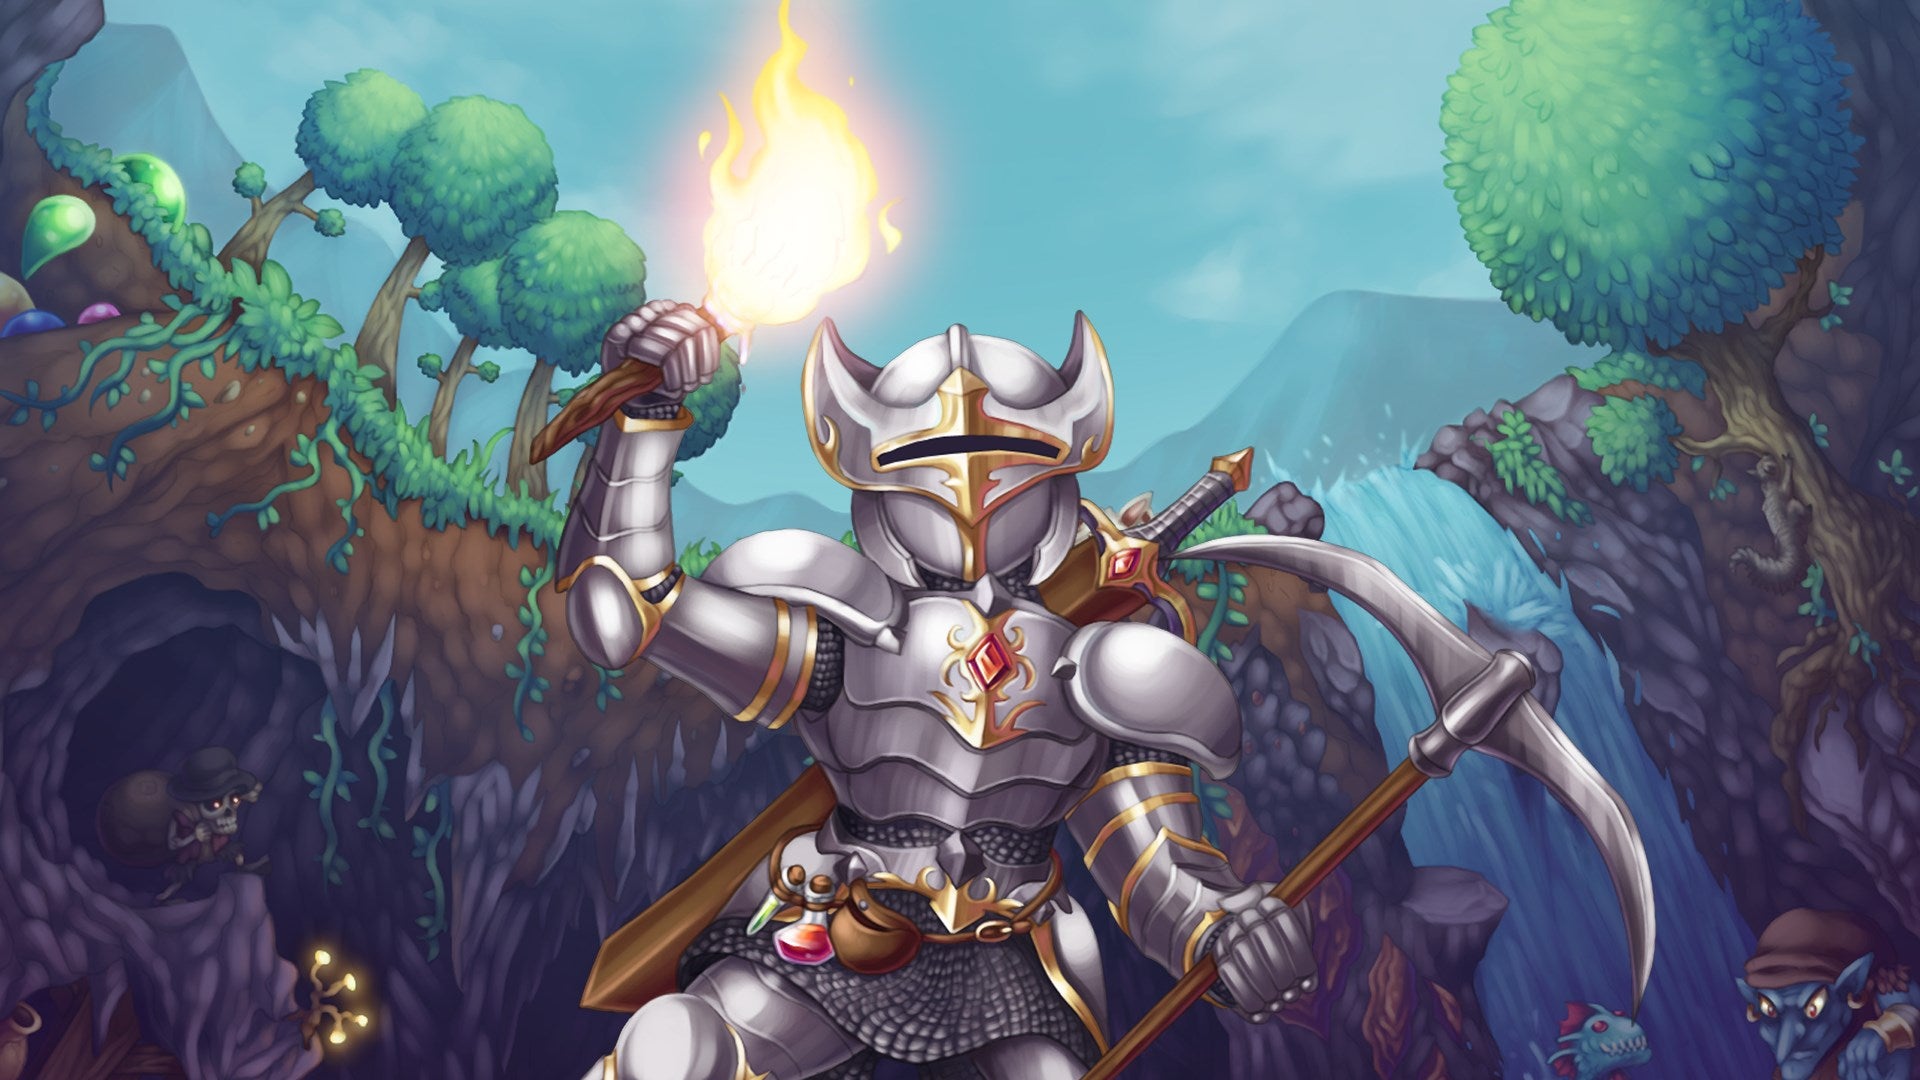 A knight wields a torch and pickaxe in this Terraria artwork.